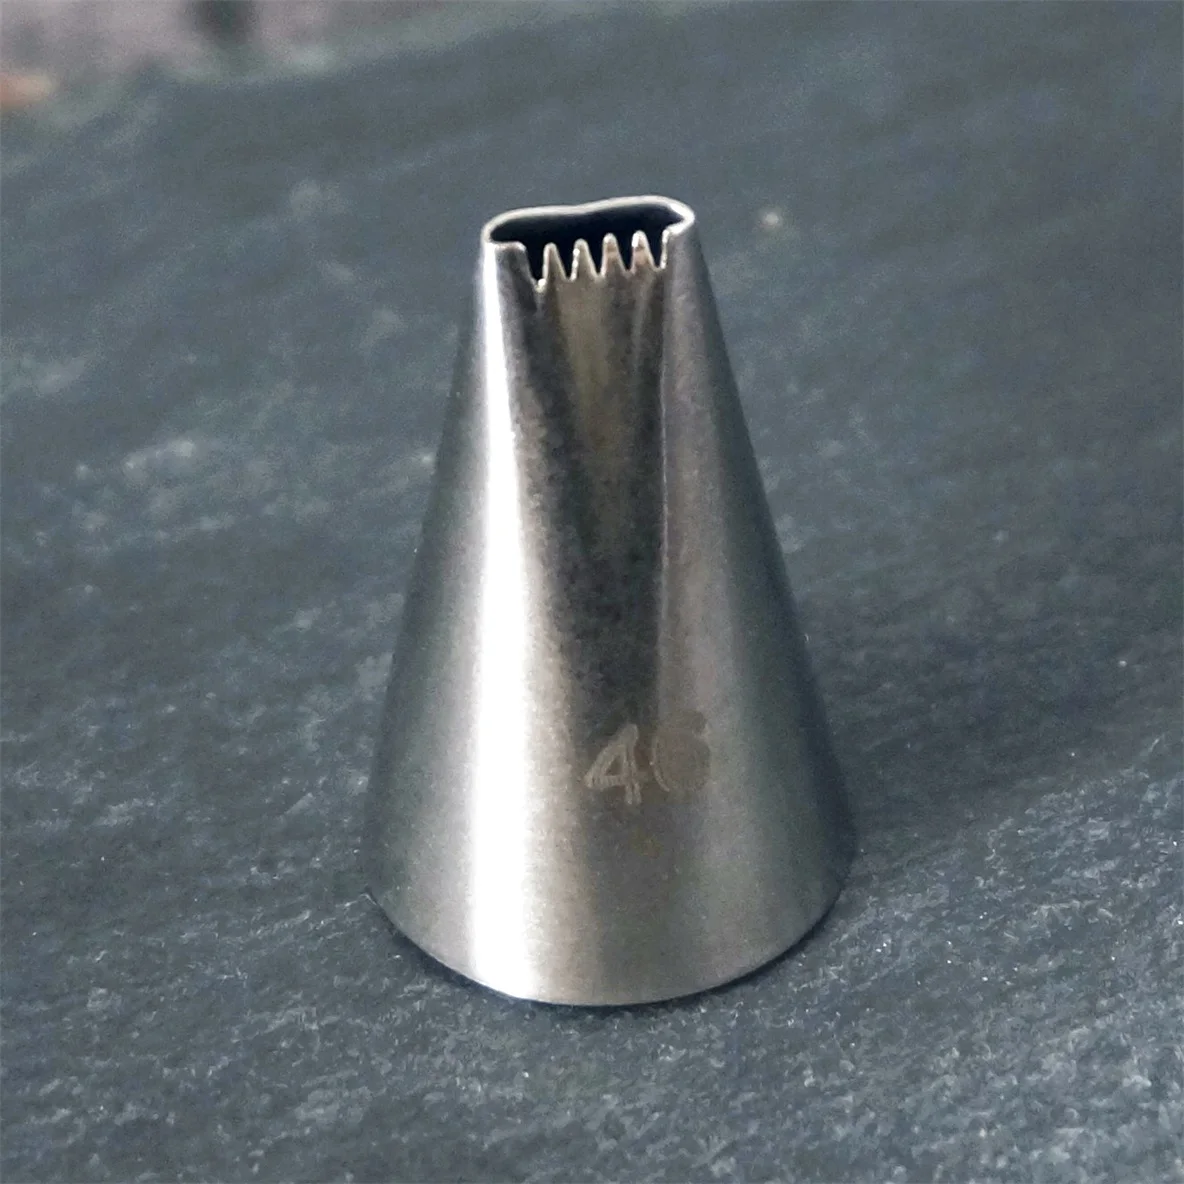 

#46 Small Size Basket Weave Piping Nozzle Basketweave Decorating Tip Nozzle Baking Tools For Cakes Bakeware Icing Tip